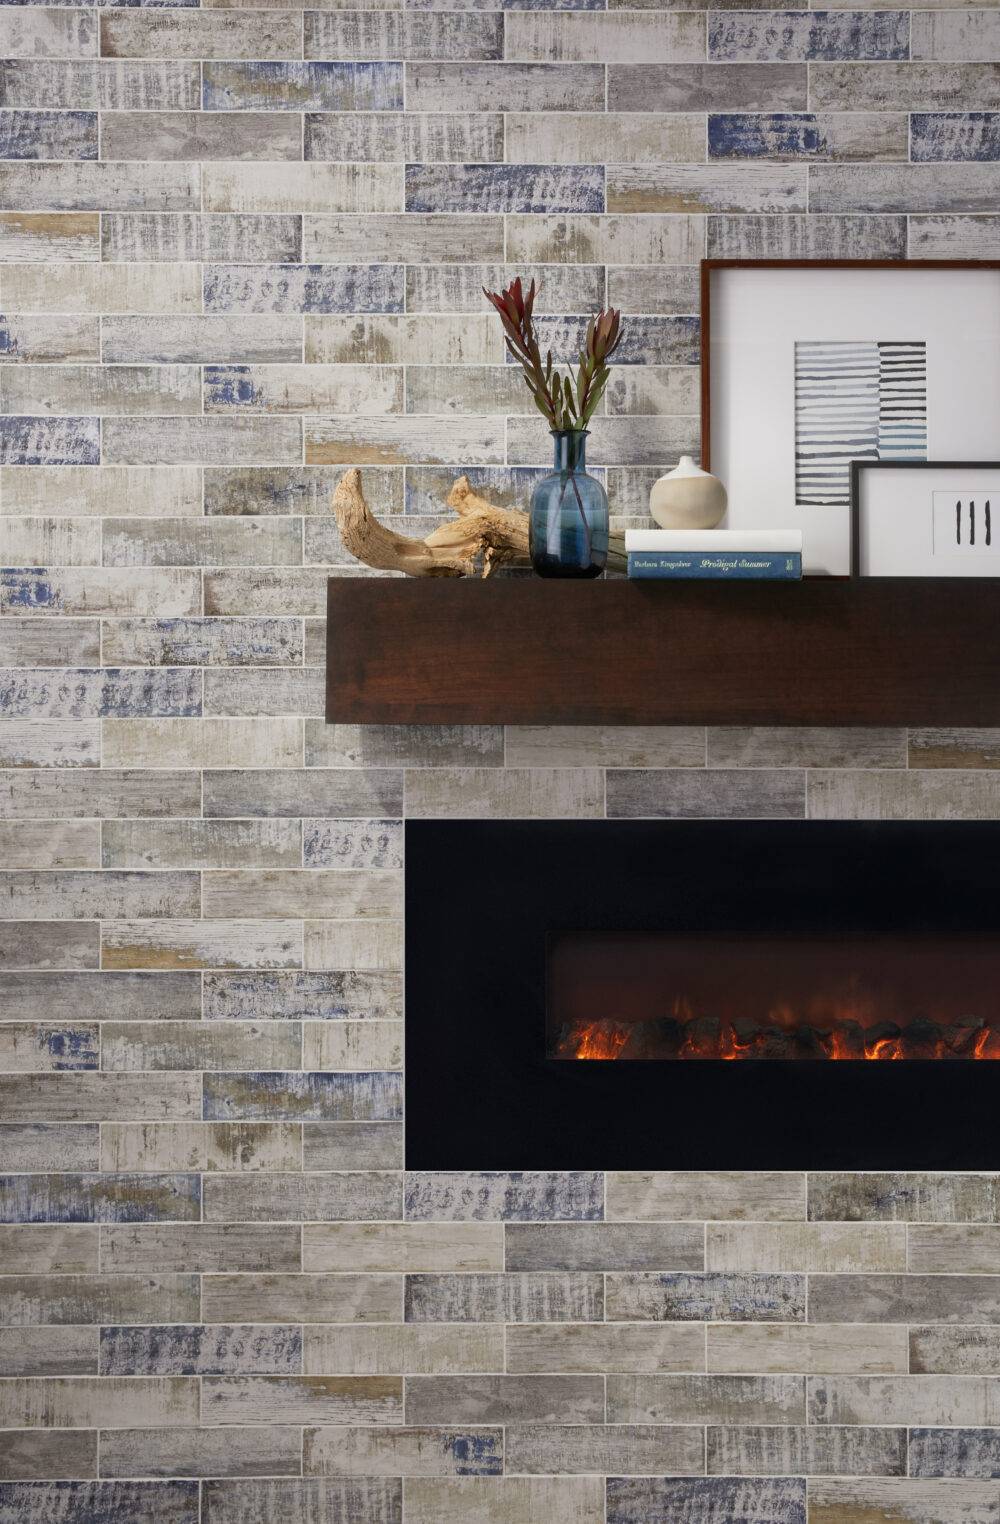 Fireplace surround with the rustic look of weathered wood in a ceramic subway tile set in a horizontal brick pattern. Mantal is a large floating pice of warner toned wood and fire box is matte black.  